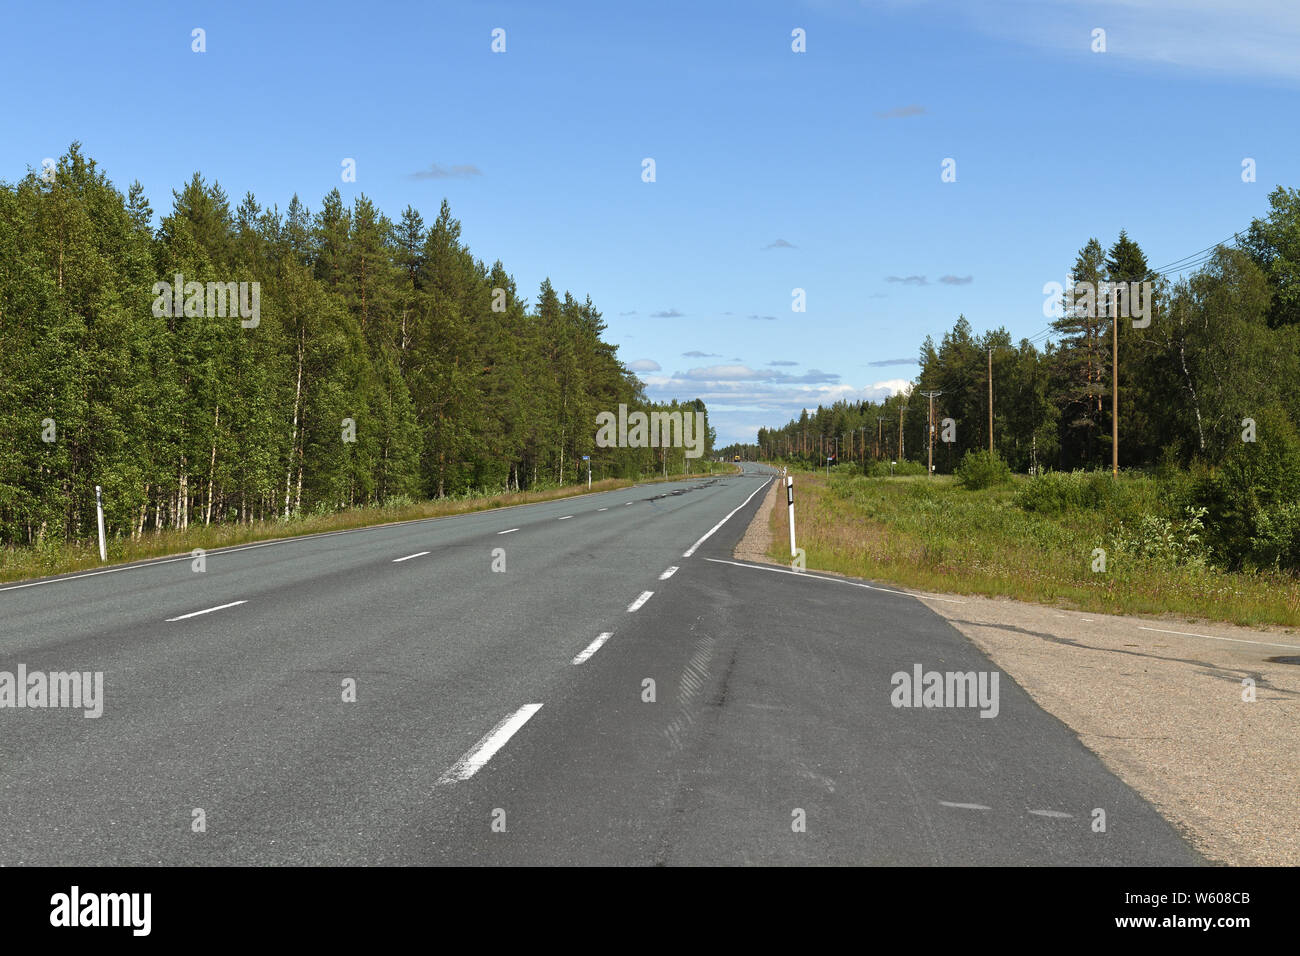 Northern Highway in Finnish Lapland. Bright sunny day Stock Photo